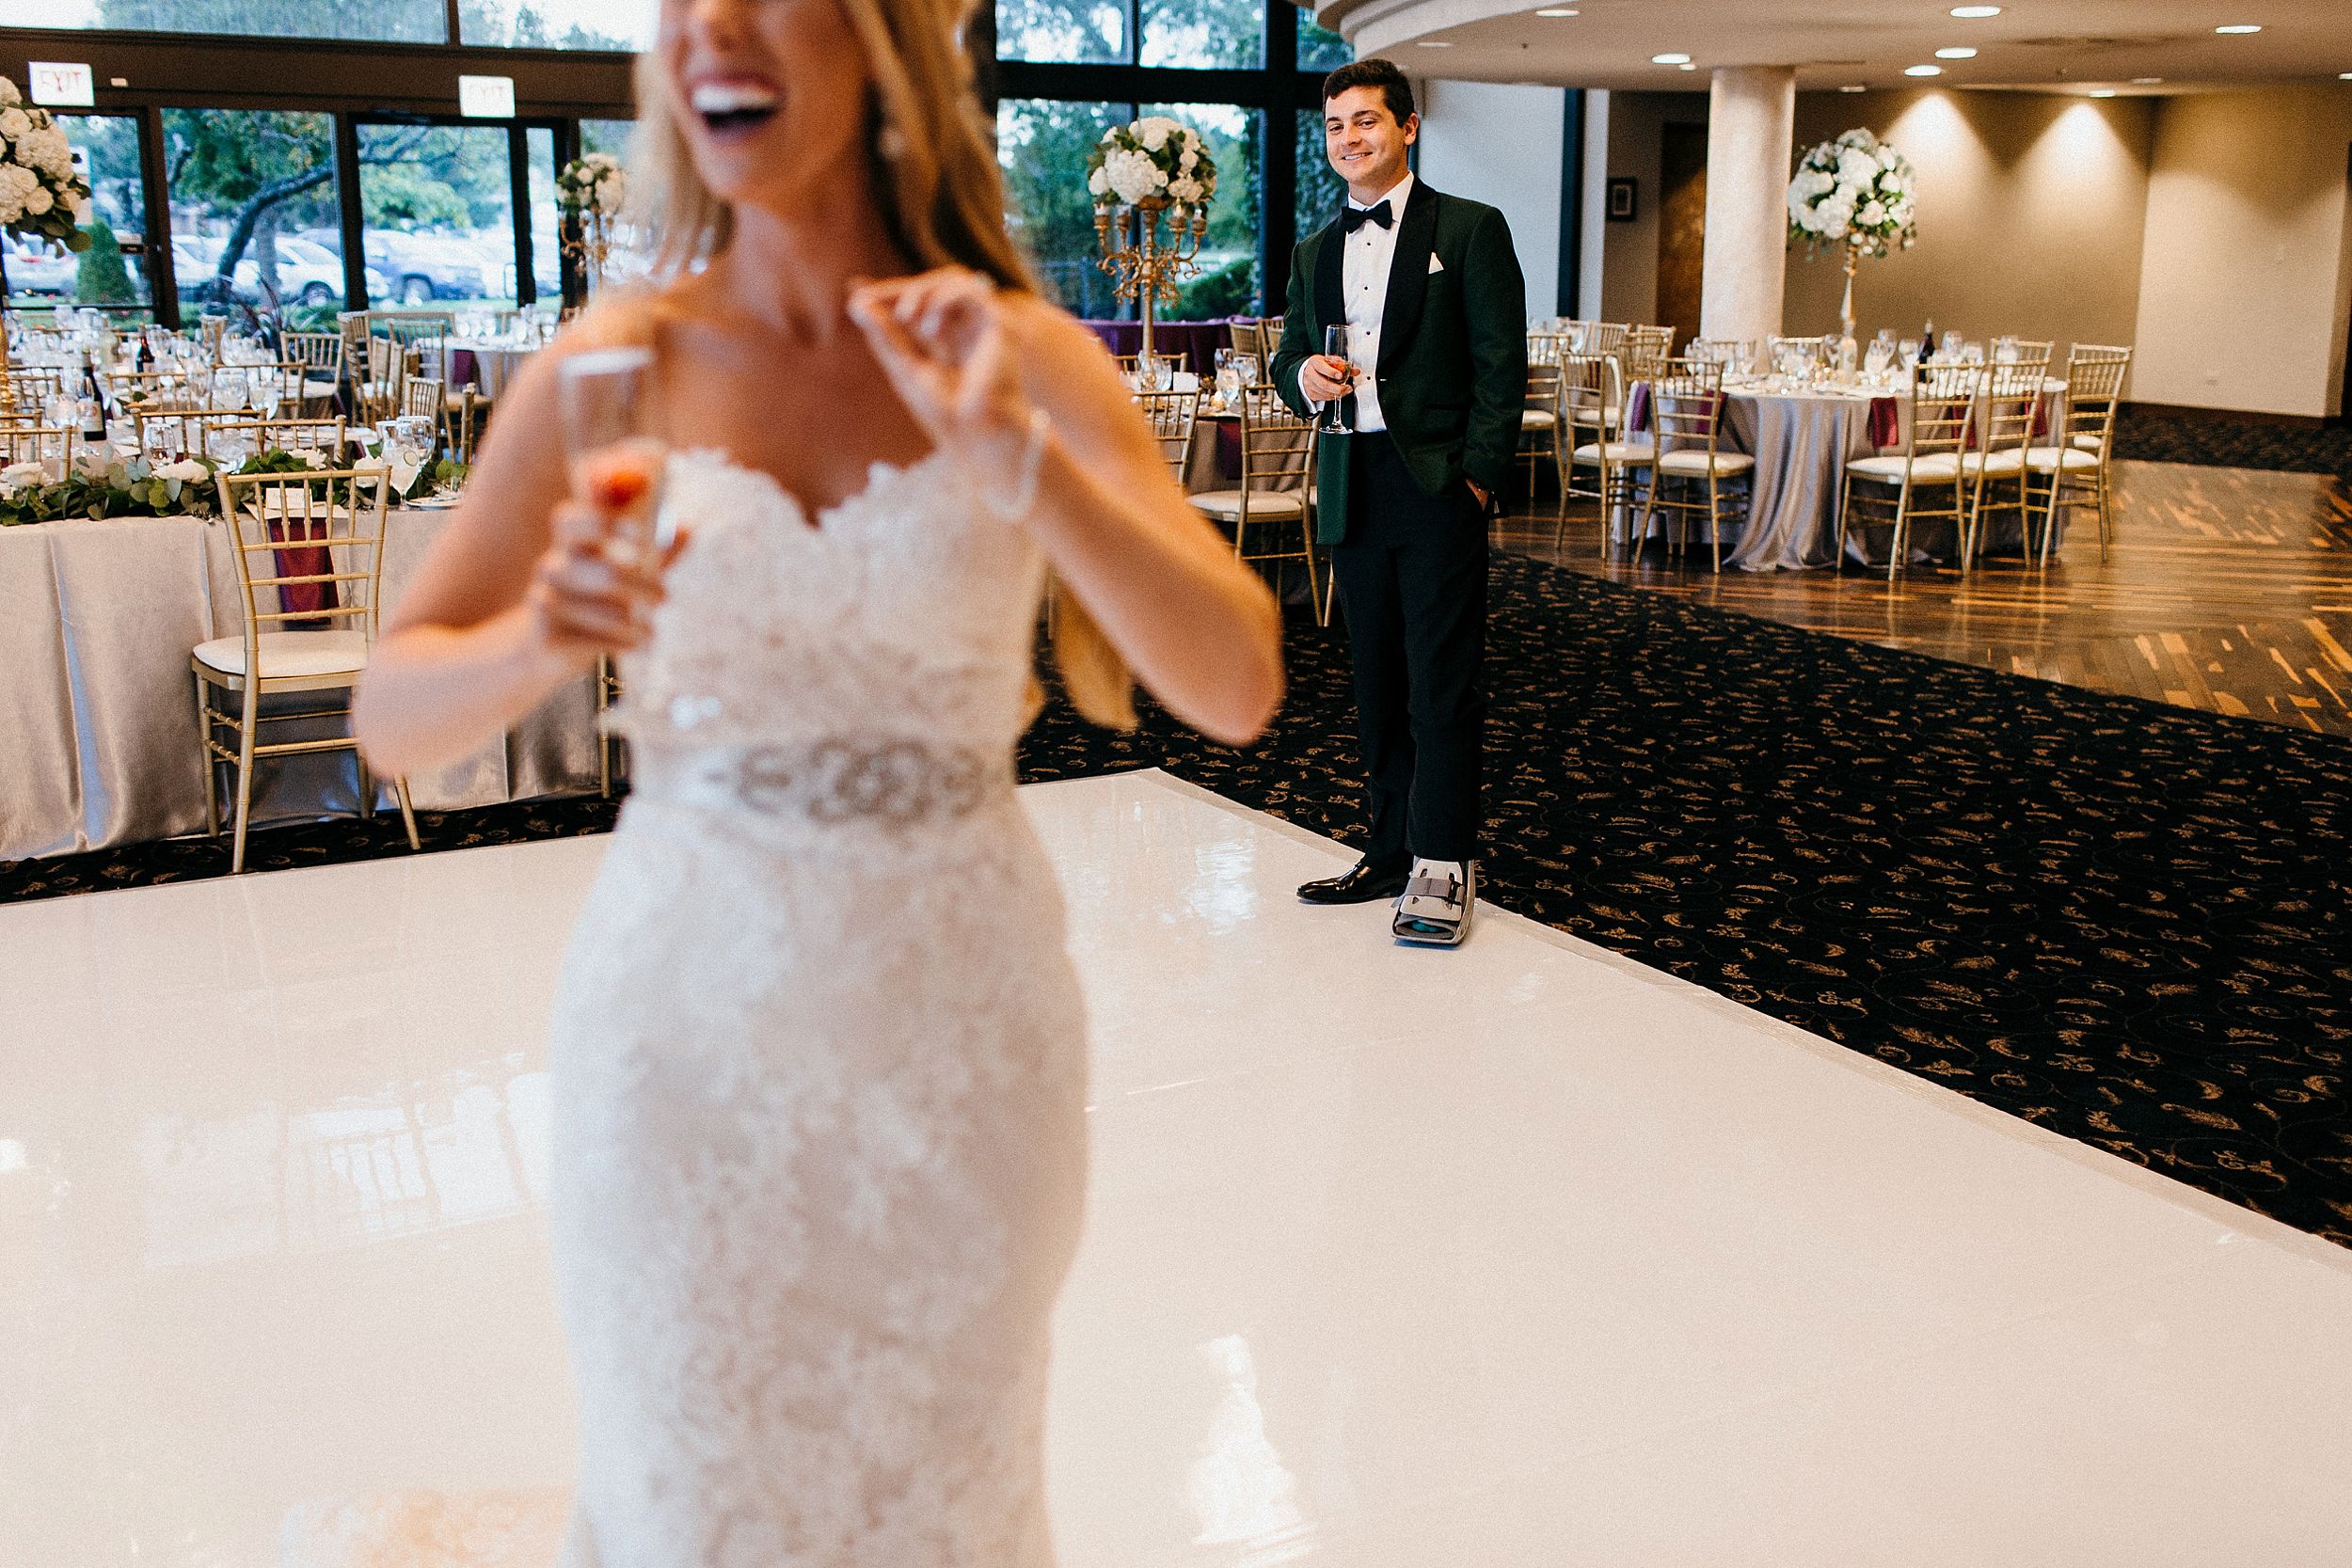 Bride and Groom's Happiness at their Reception